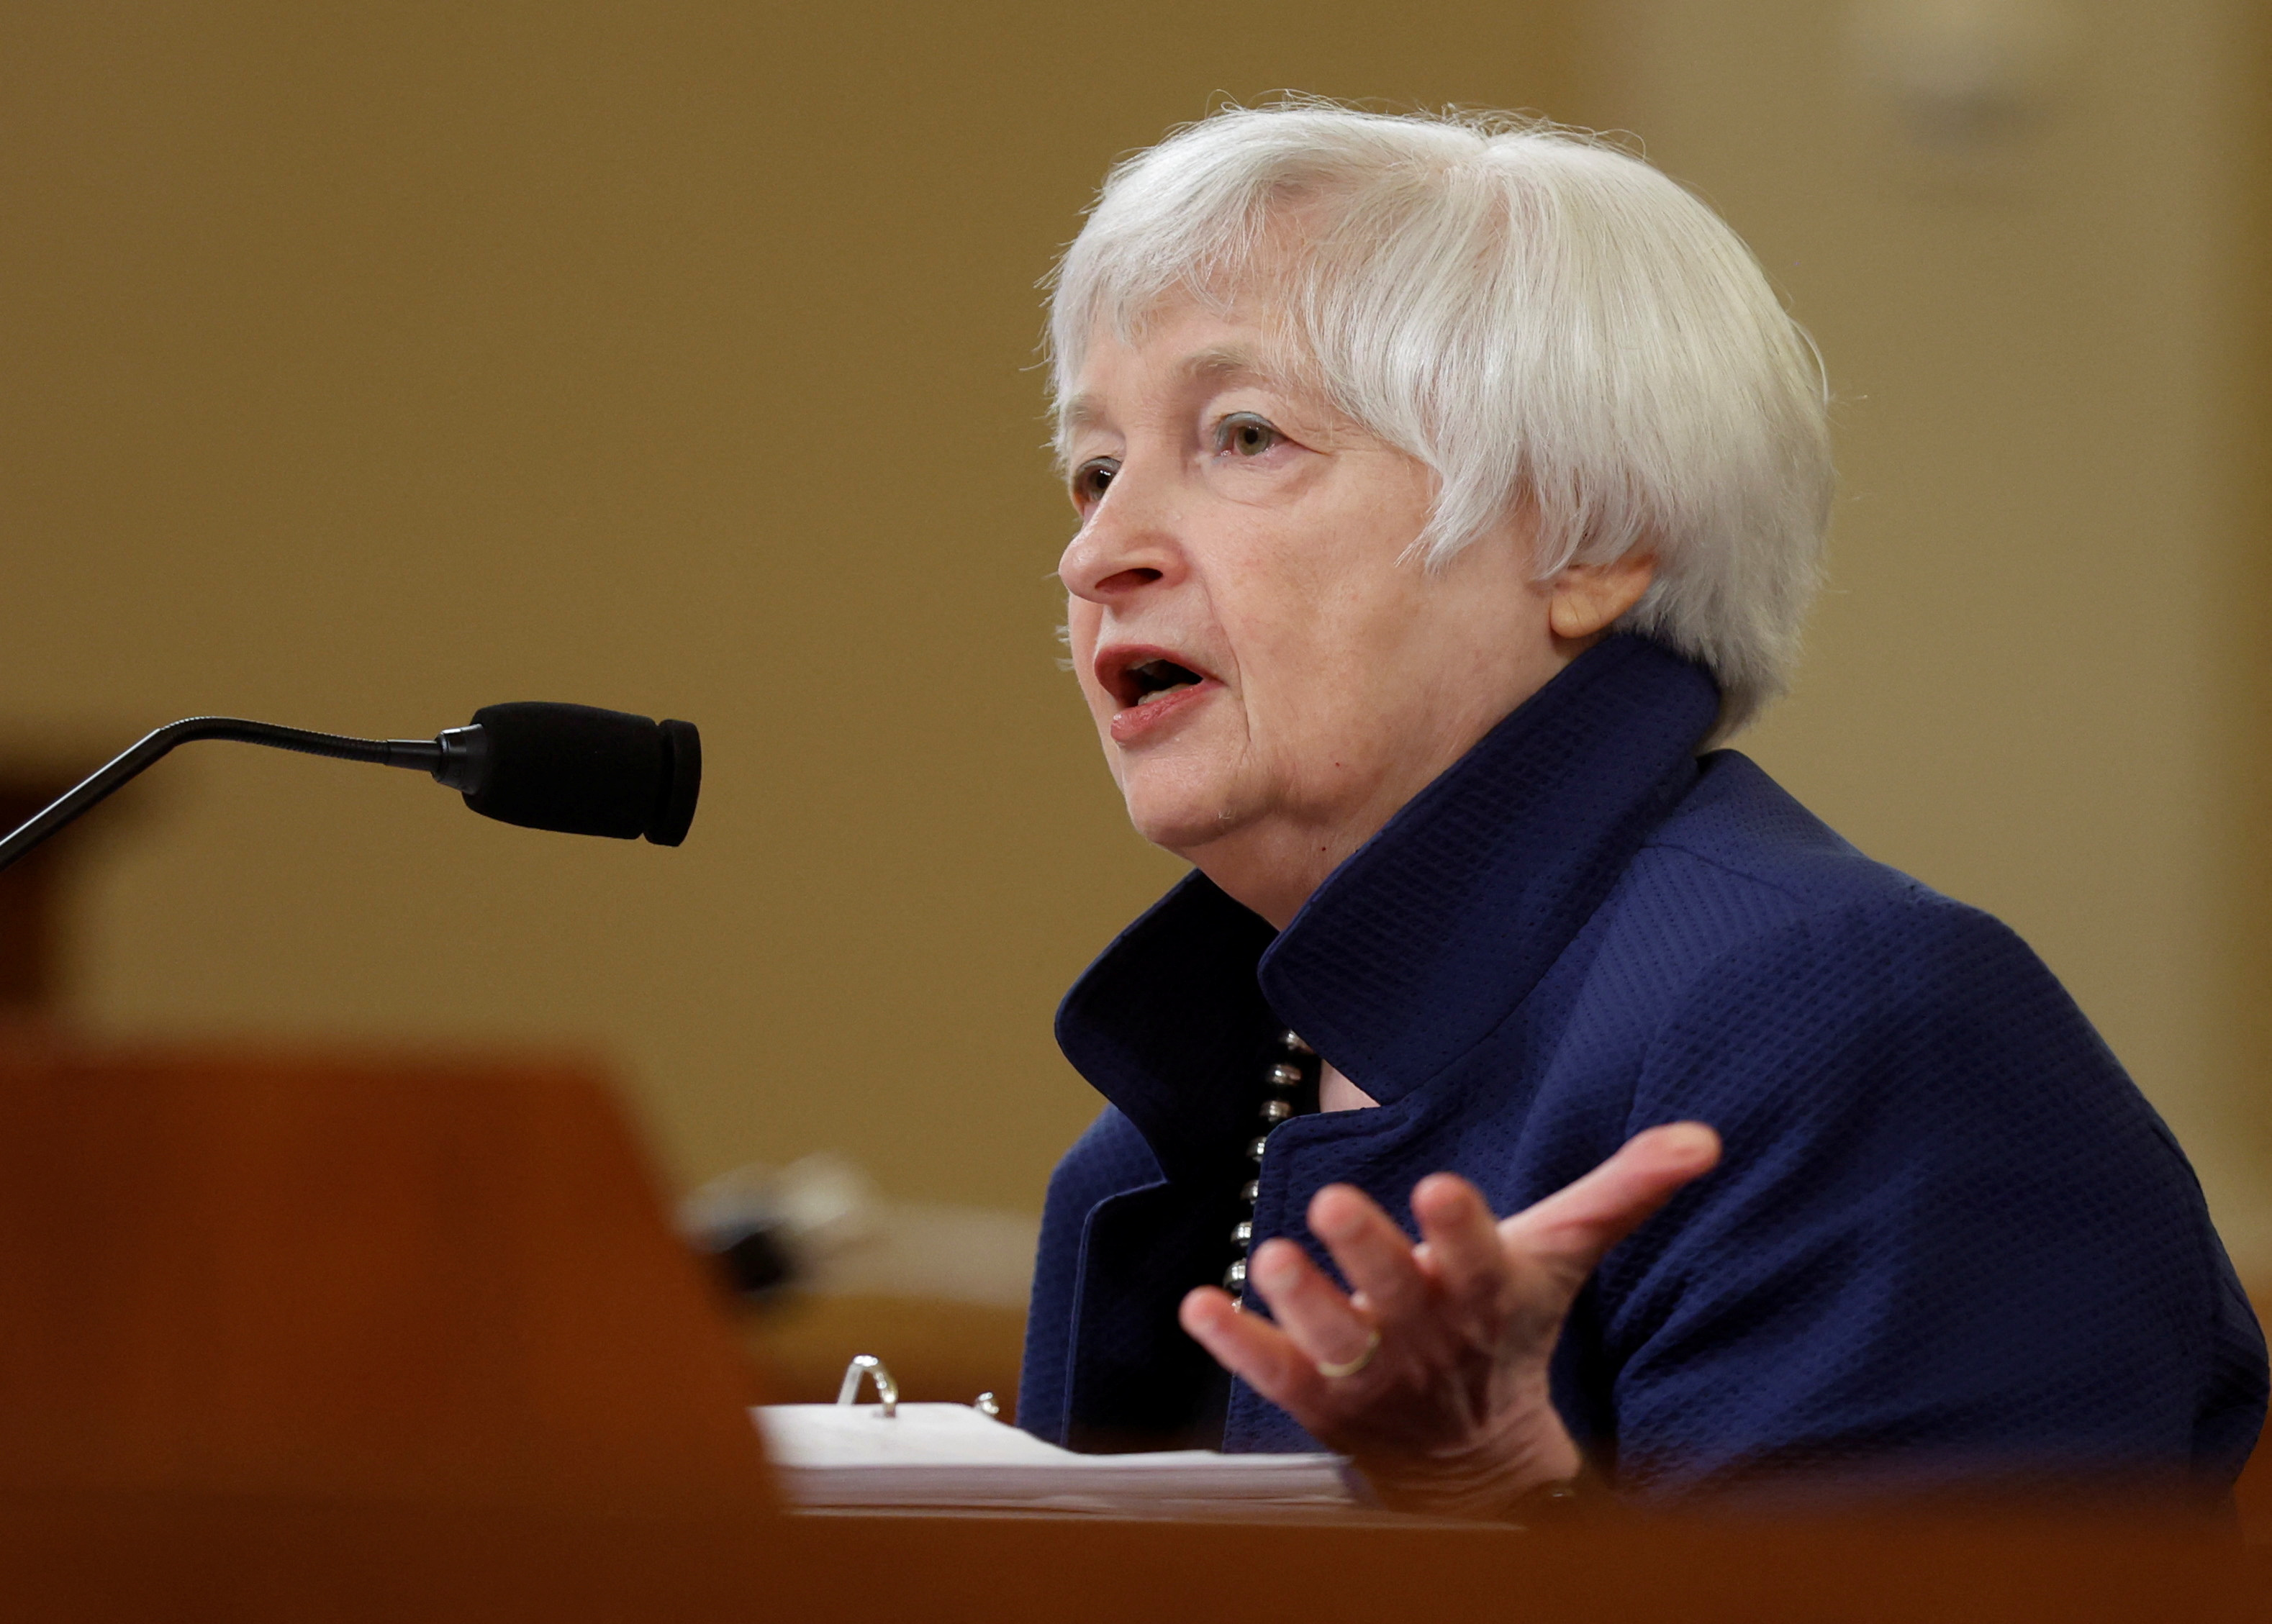 U.S. Treasury Secretary Janet Yellen testifies before House Ways and Means Committee hearing on President Biden's 2023 budget on Capitol Hill in Washington